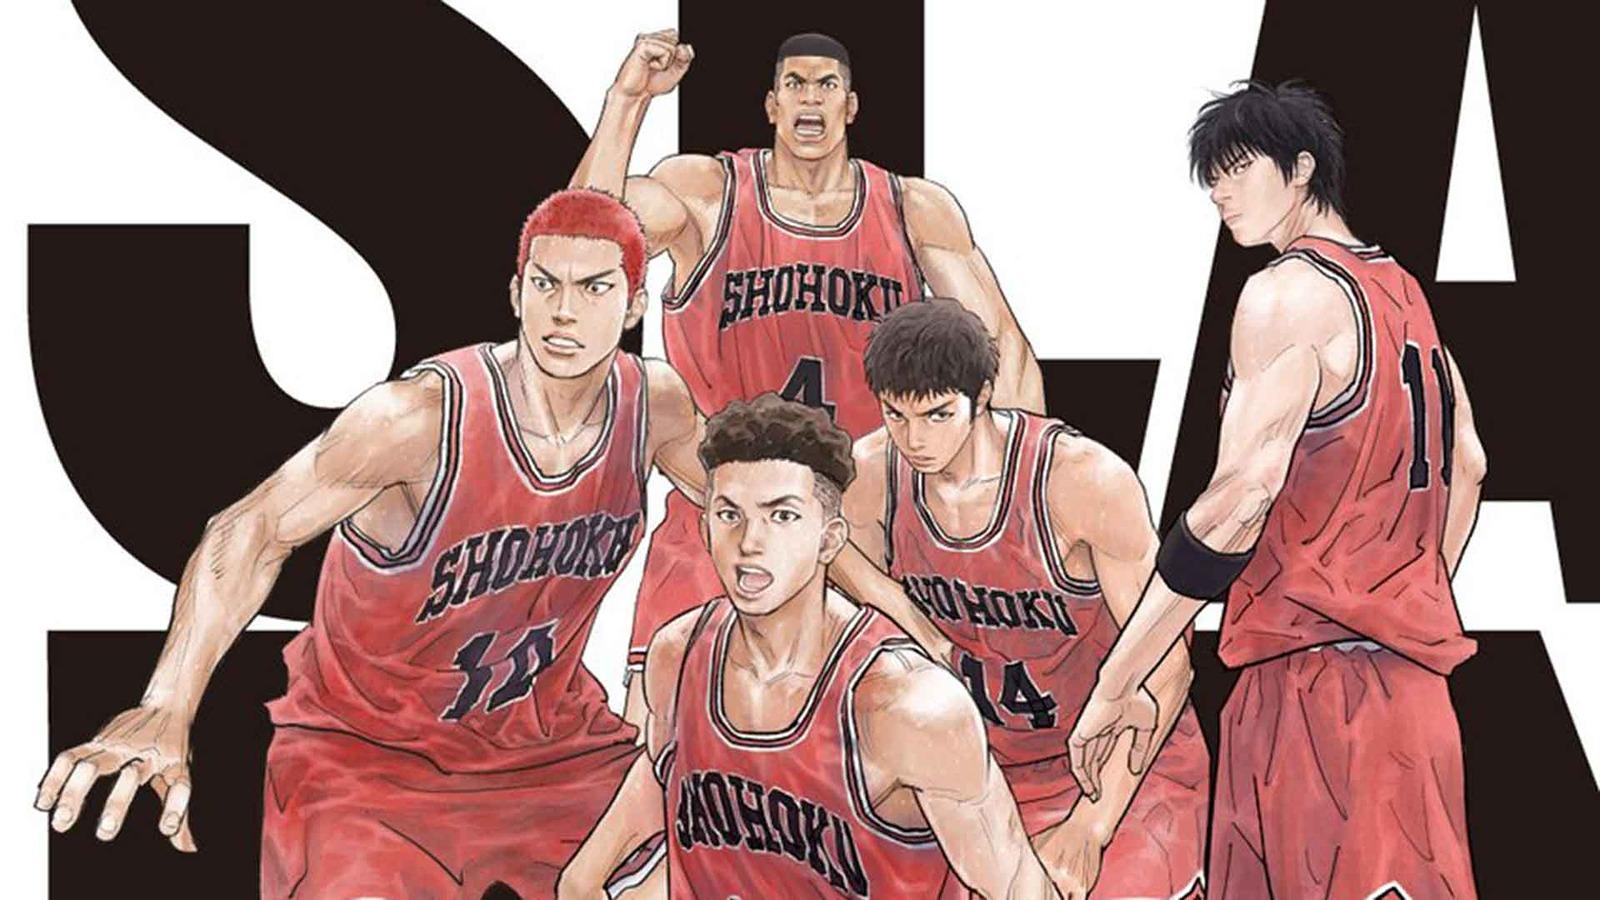 An image of the official poster of The First Slam Dunk movie